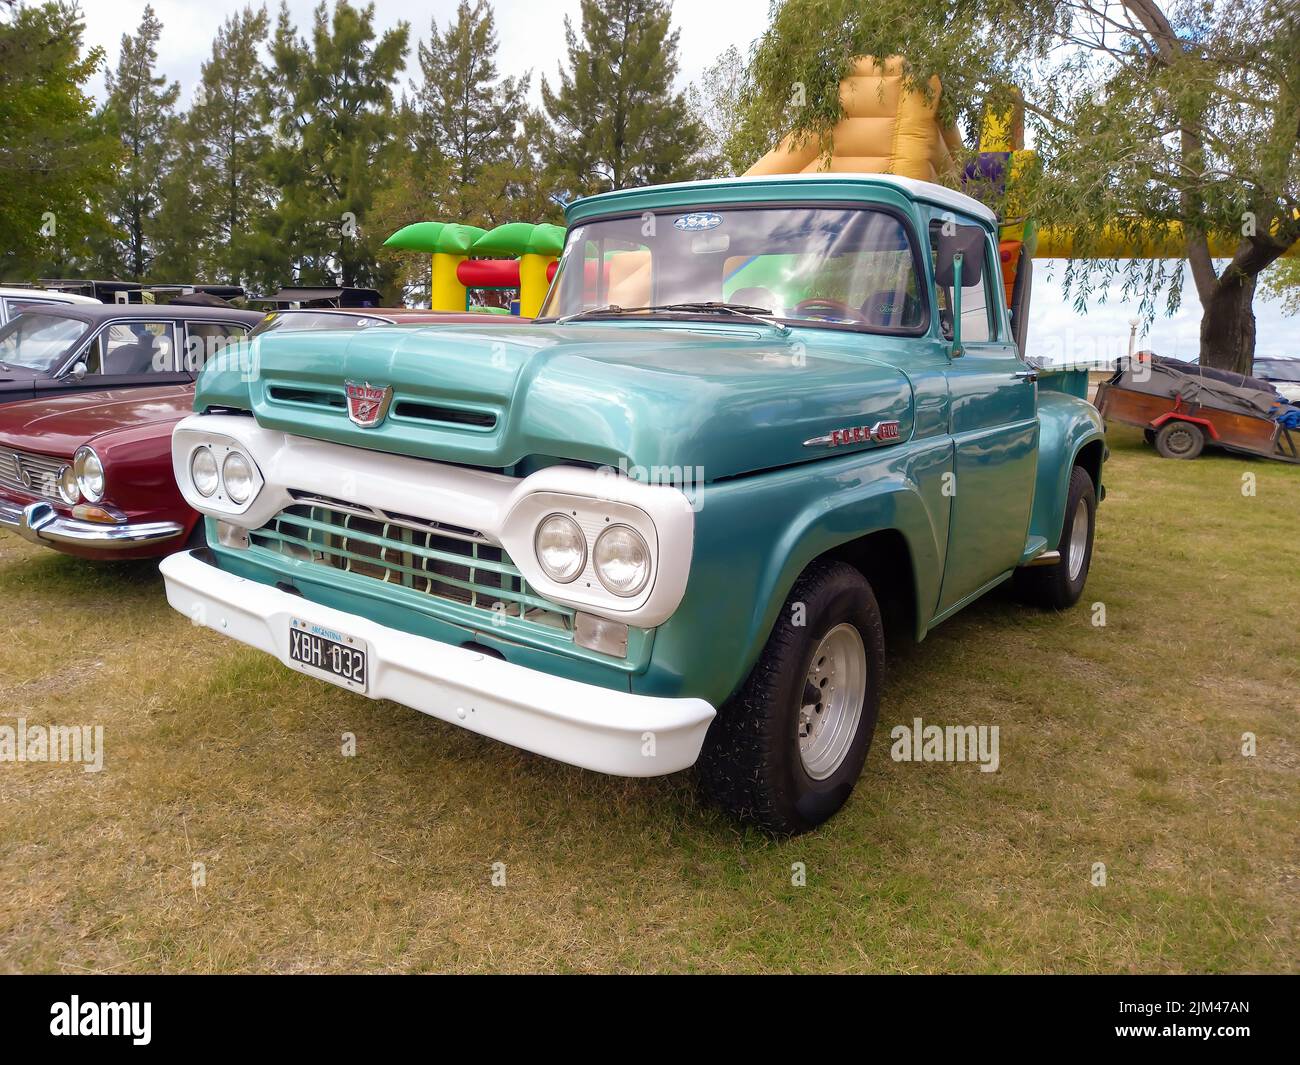 Old aqua utility pickup truck Ford F 100 Flareside bed third generation 1960. Nature grass trees. Classic car show. Copyspace Stock Photo